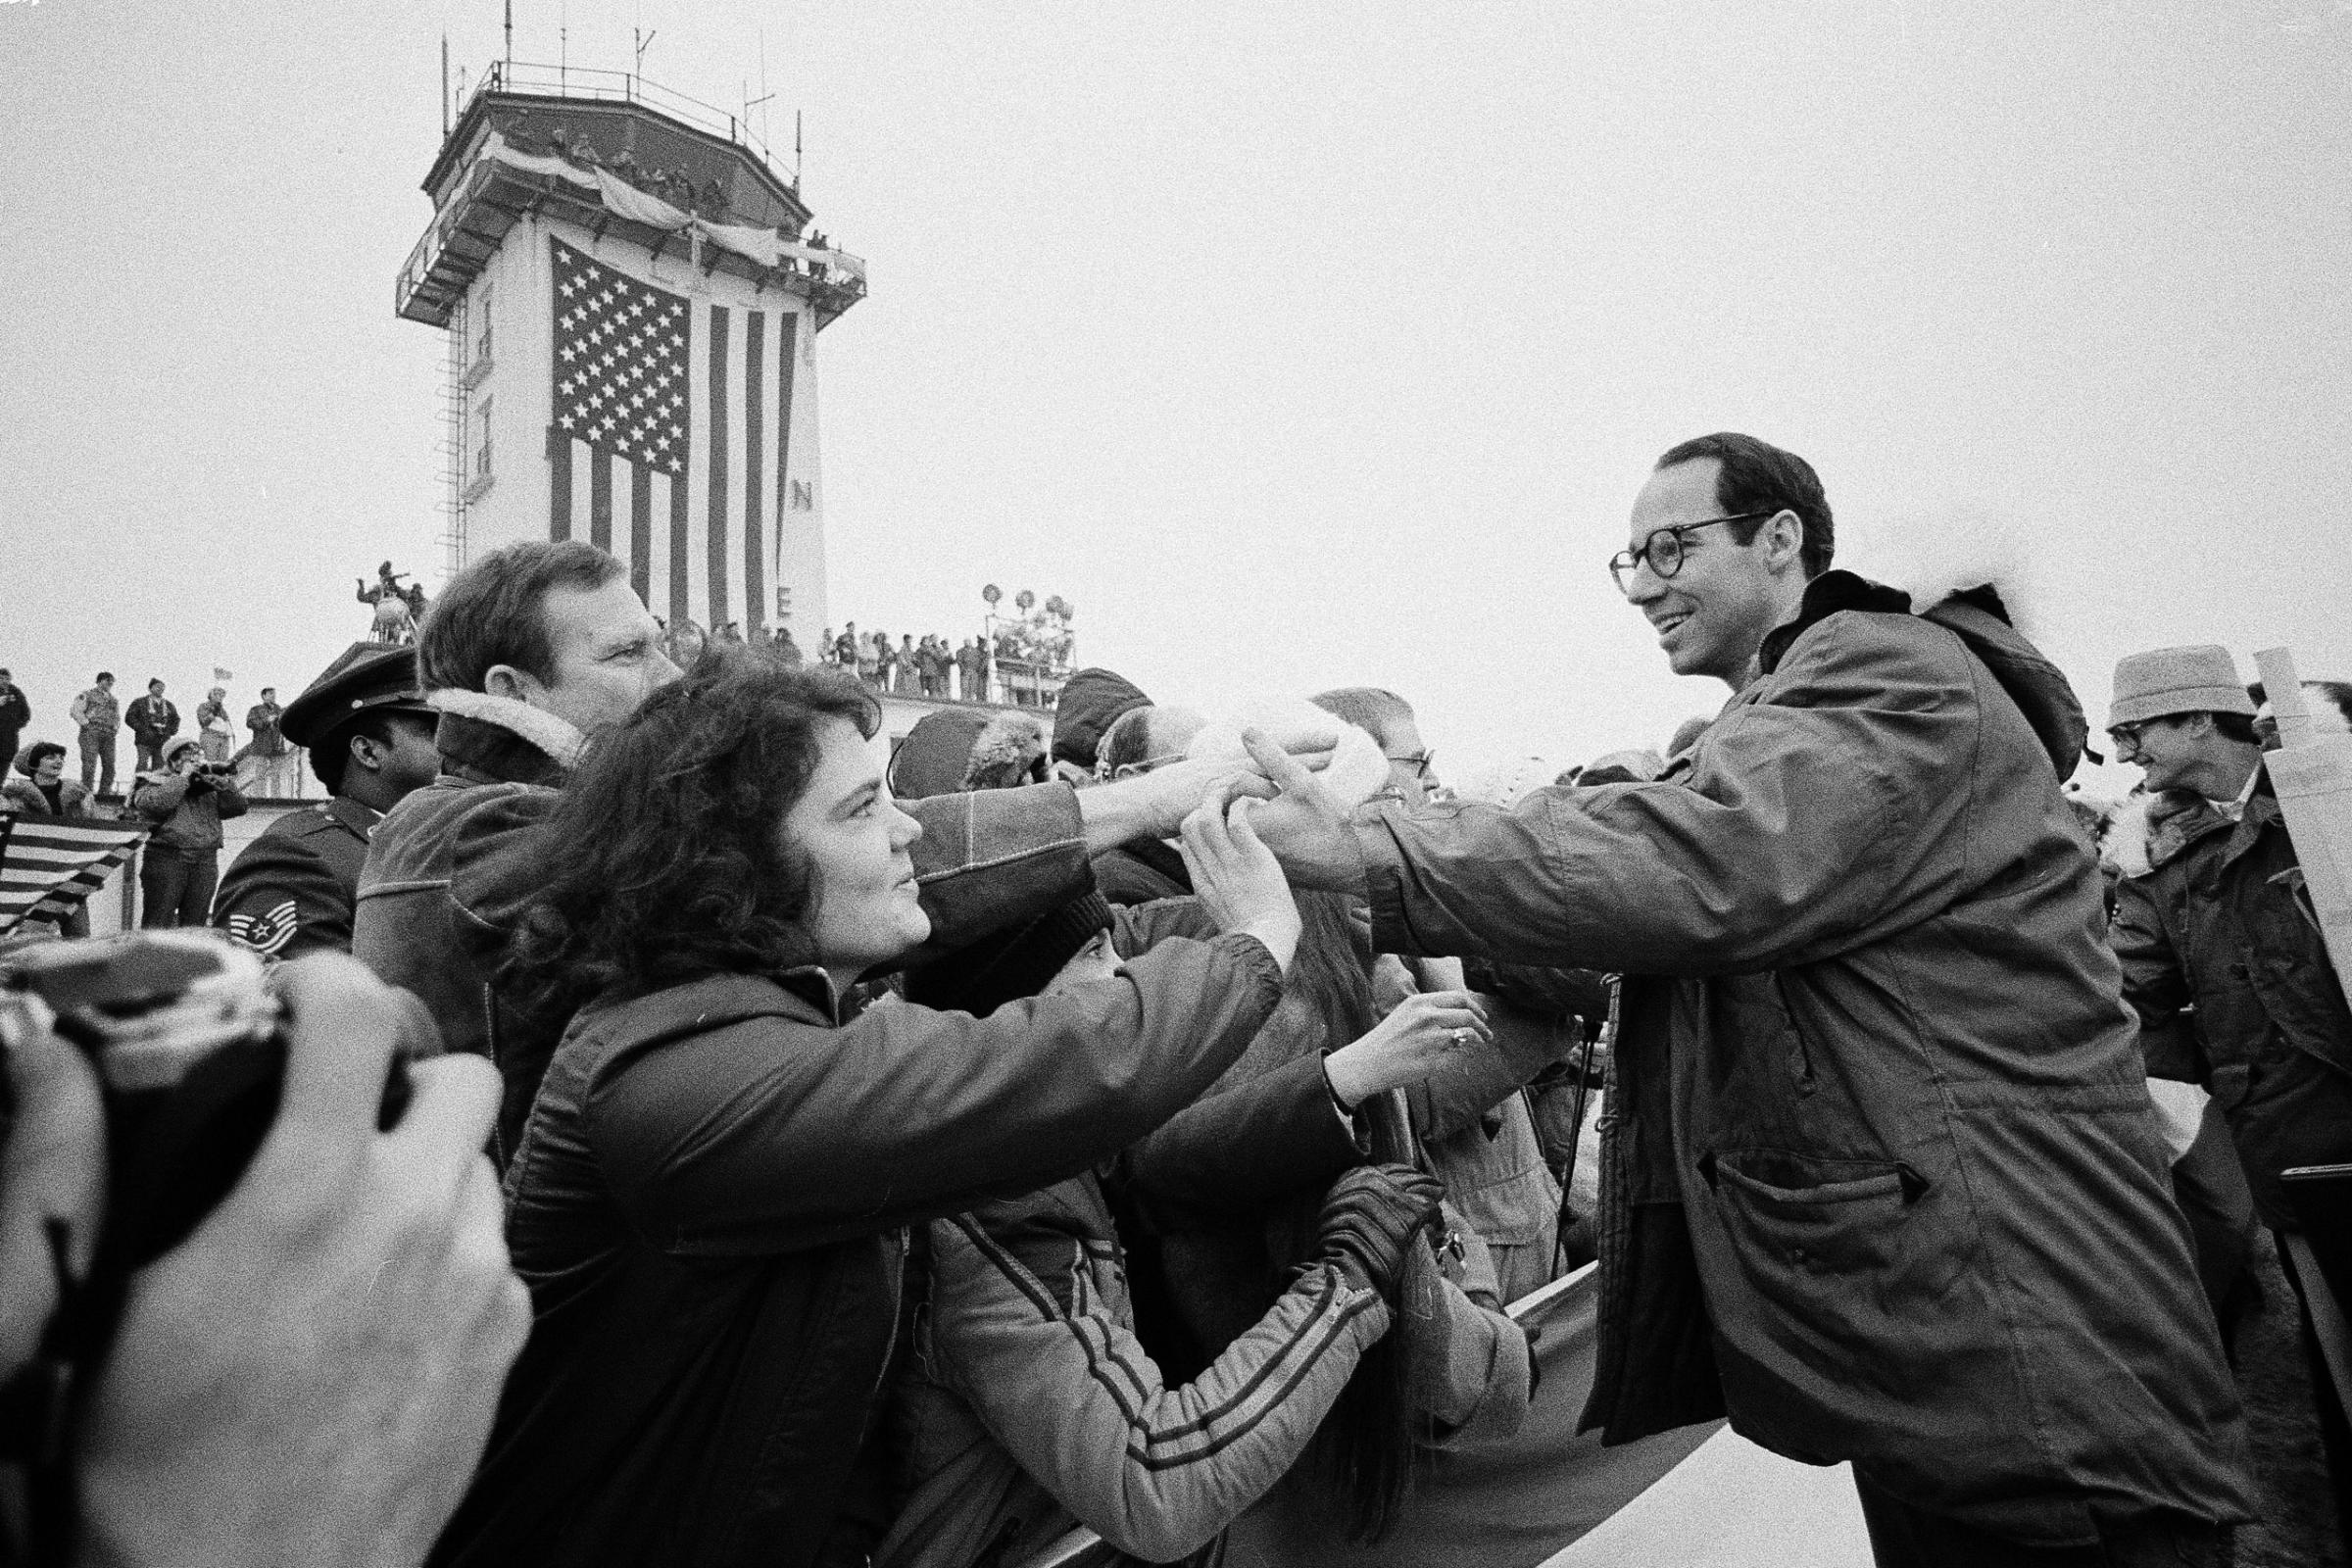 Former American hostage John Graves from Reston, Va., shakes hands with people in the crowd at the Rhein-Main U.S. Air Force base in Frankfurt, West Germany on January 21, 1981, shortly before traveling home to the United States.